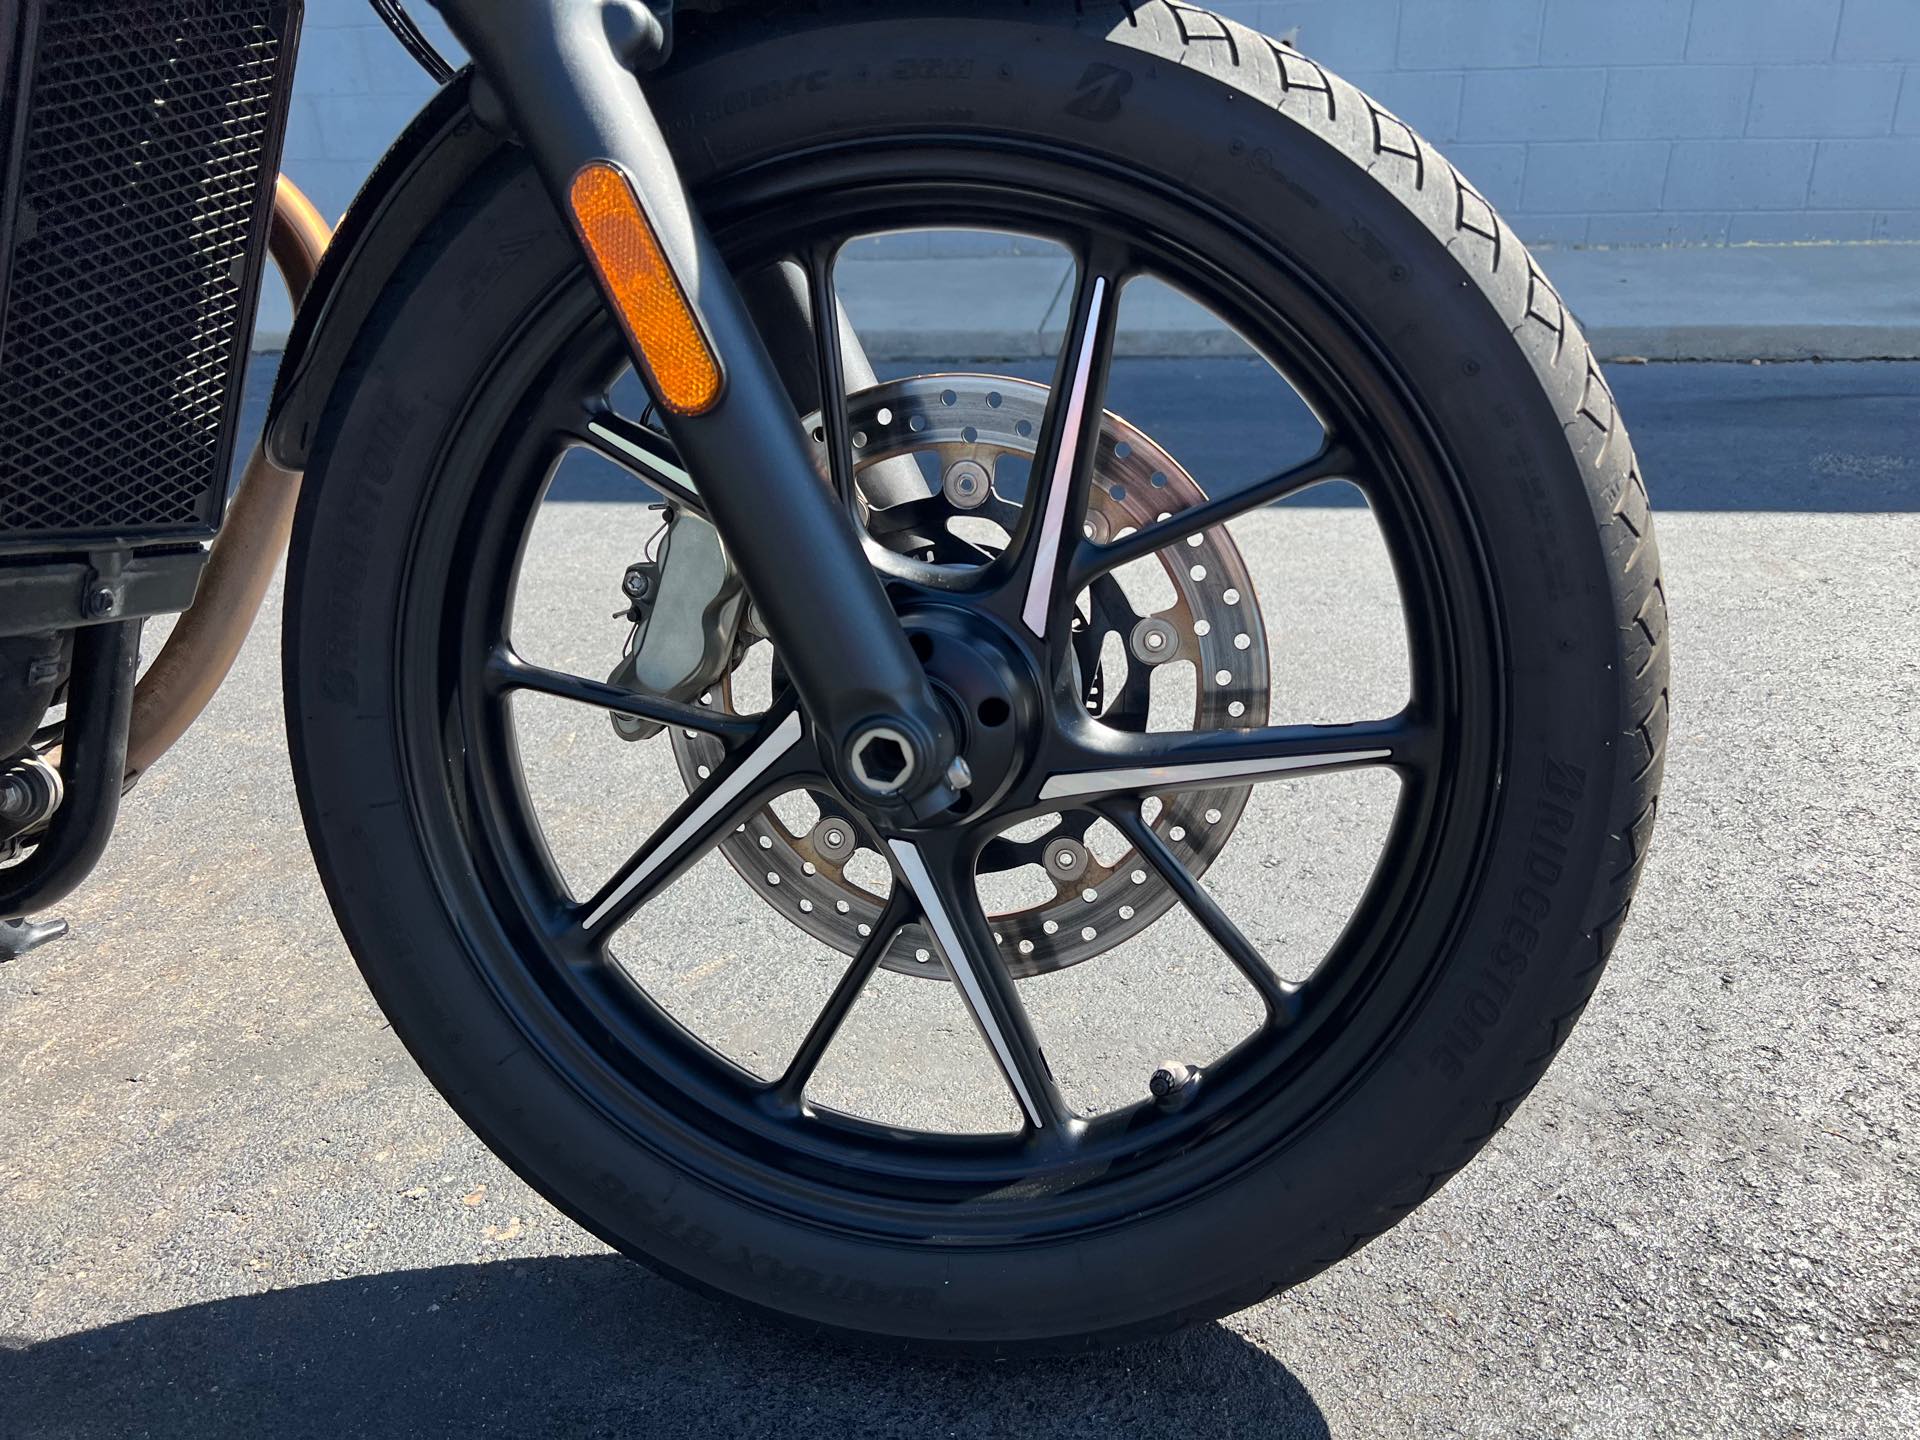 2019 Triumph Street Twin Base at Aces Motorcycles - Fort Collins